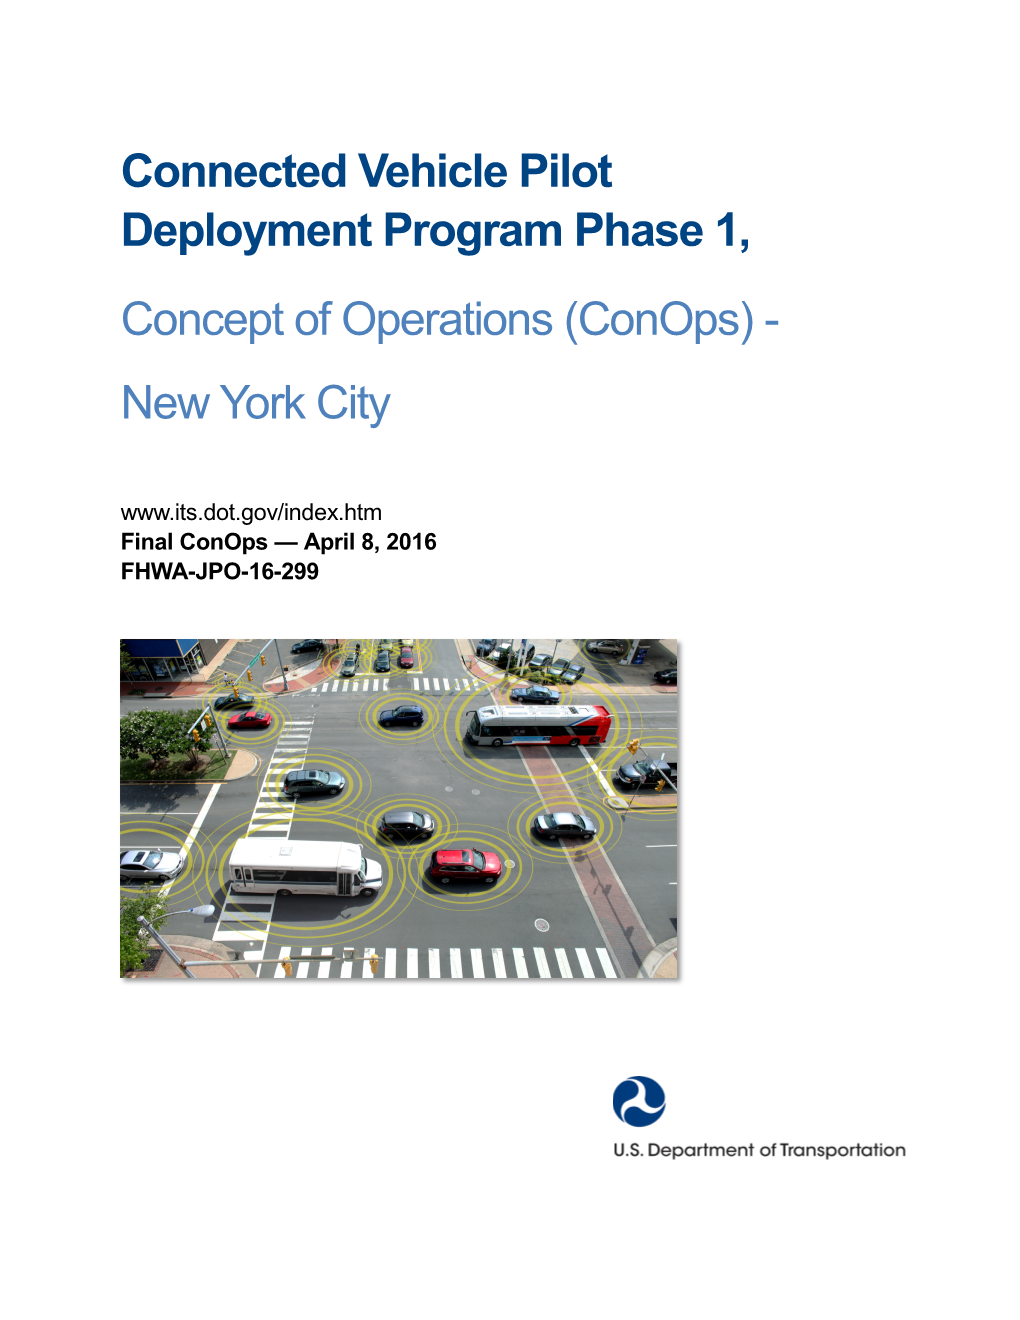 Concept of Operations (Conops) - New York City